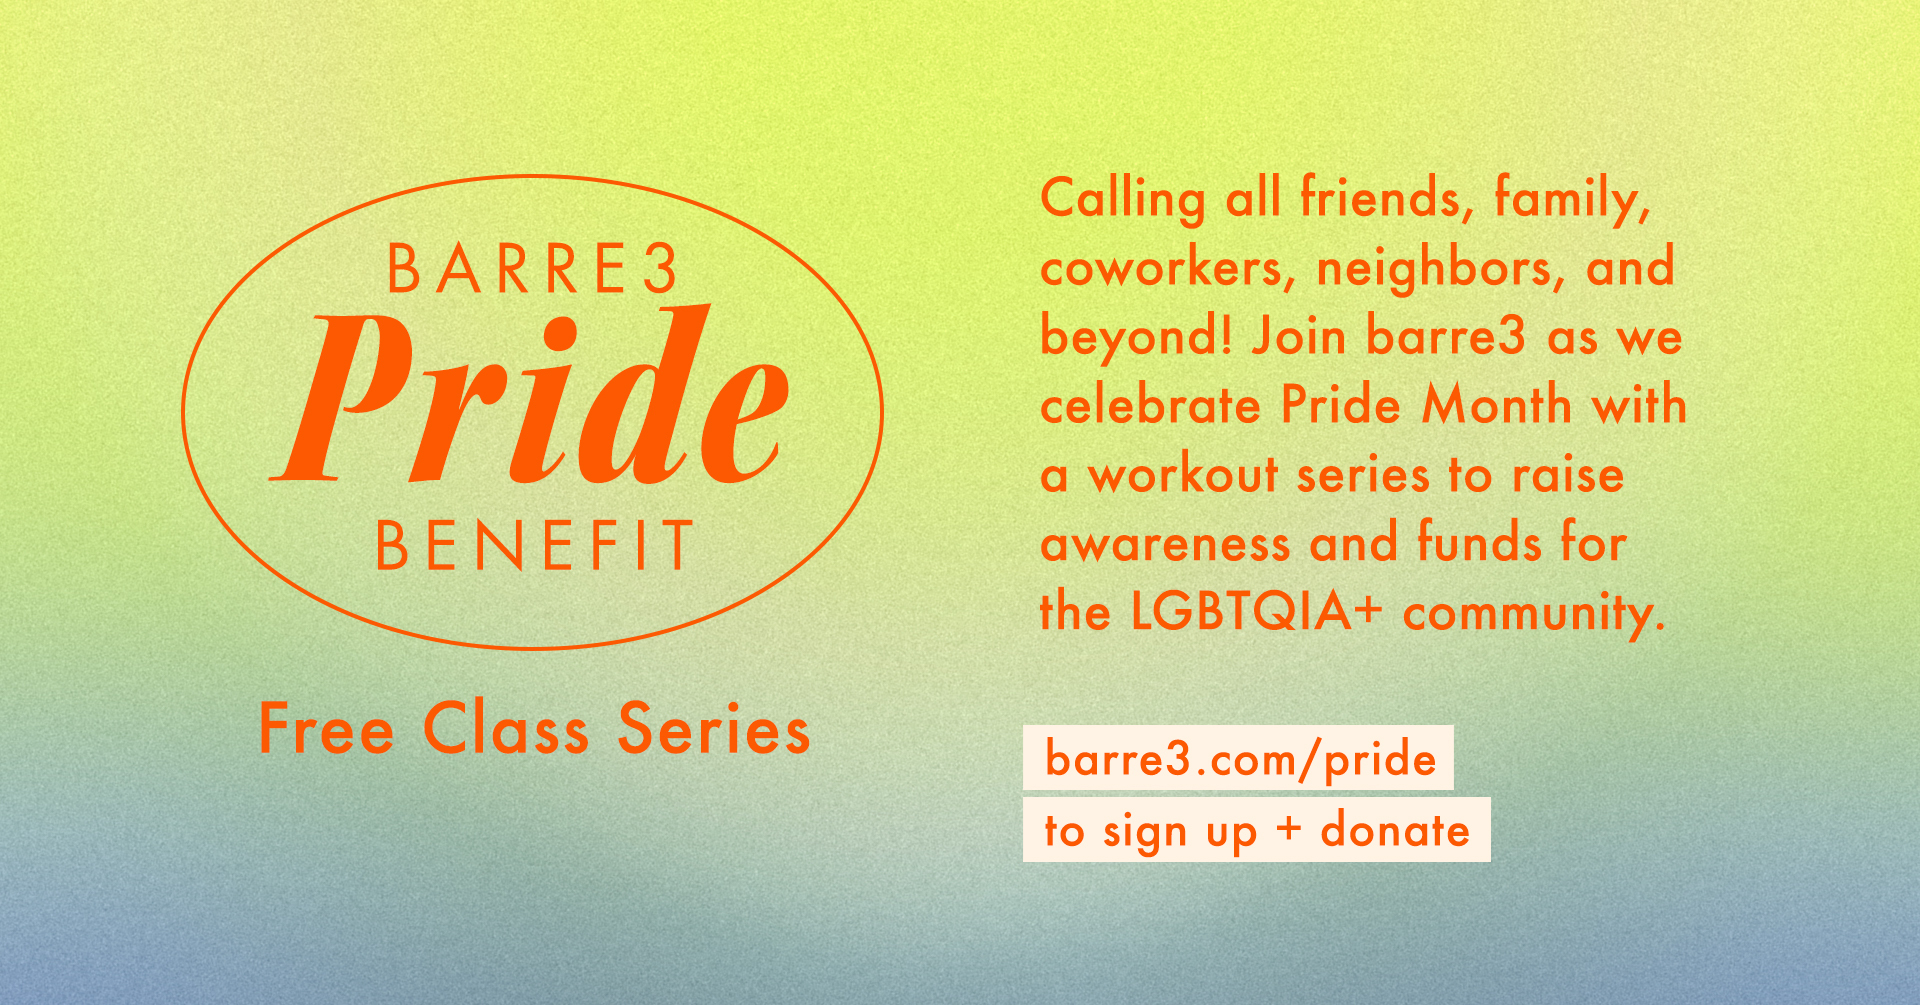 Three Ways to Celebrate Pride Month With Barre3